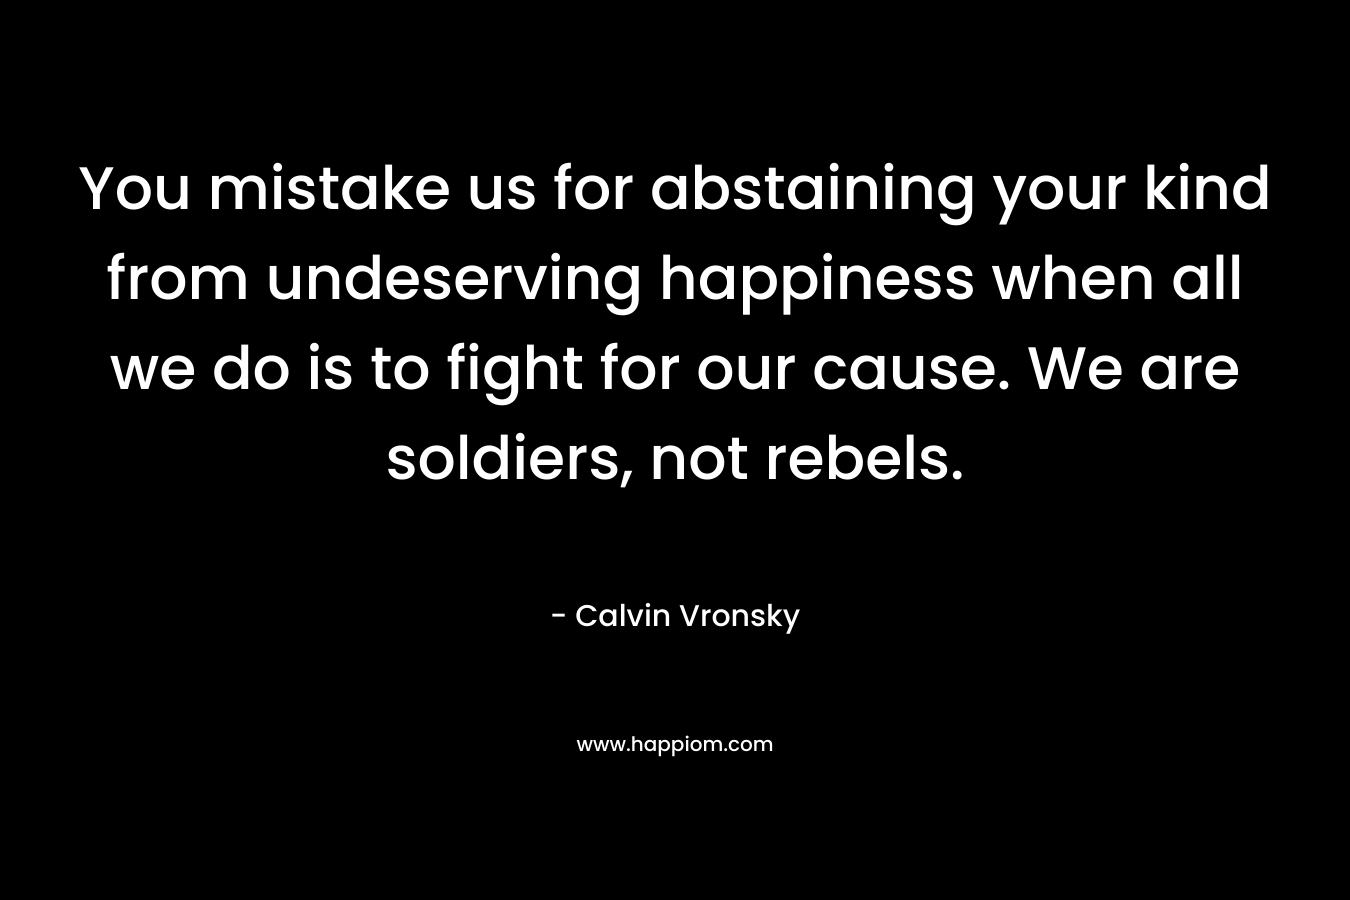 You mistake us for abstaining your kind from undeserving happiness when all we do is to fight for our cause. We are soldiers, not rebels.